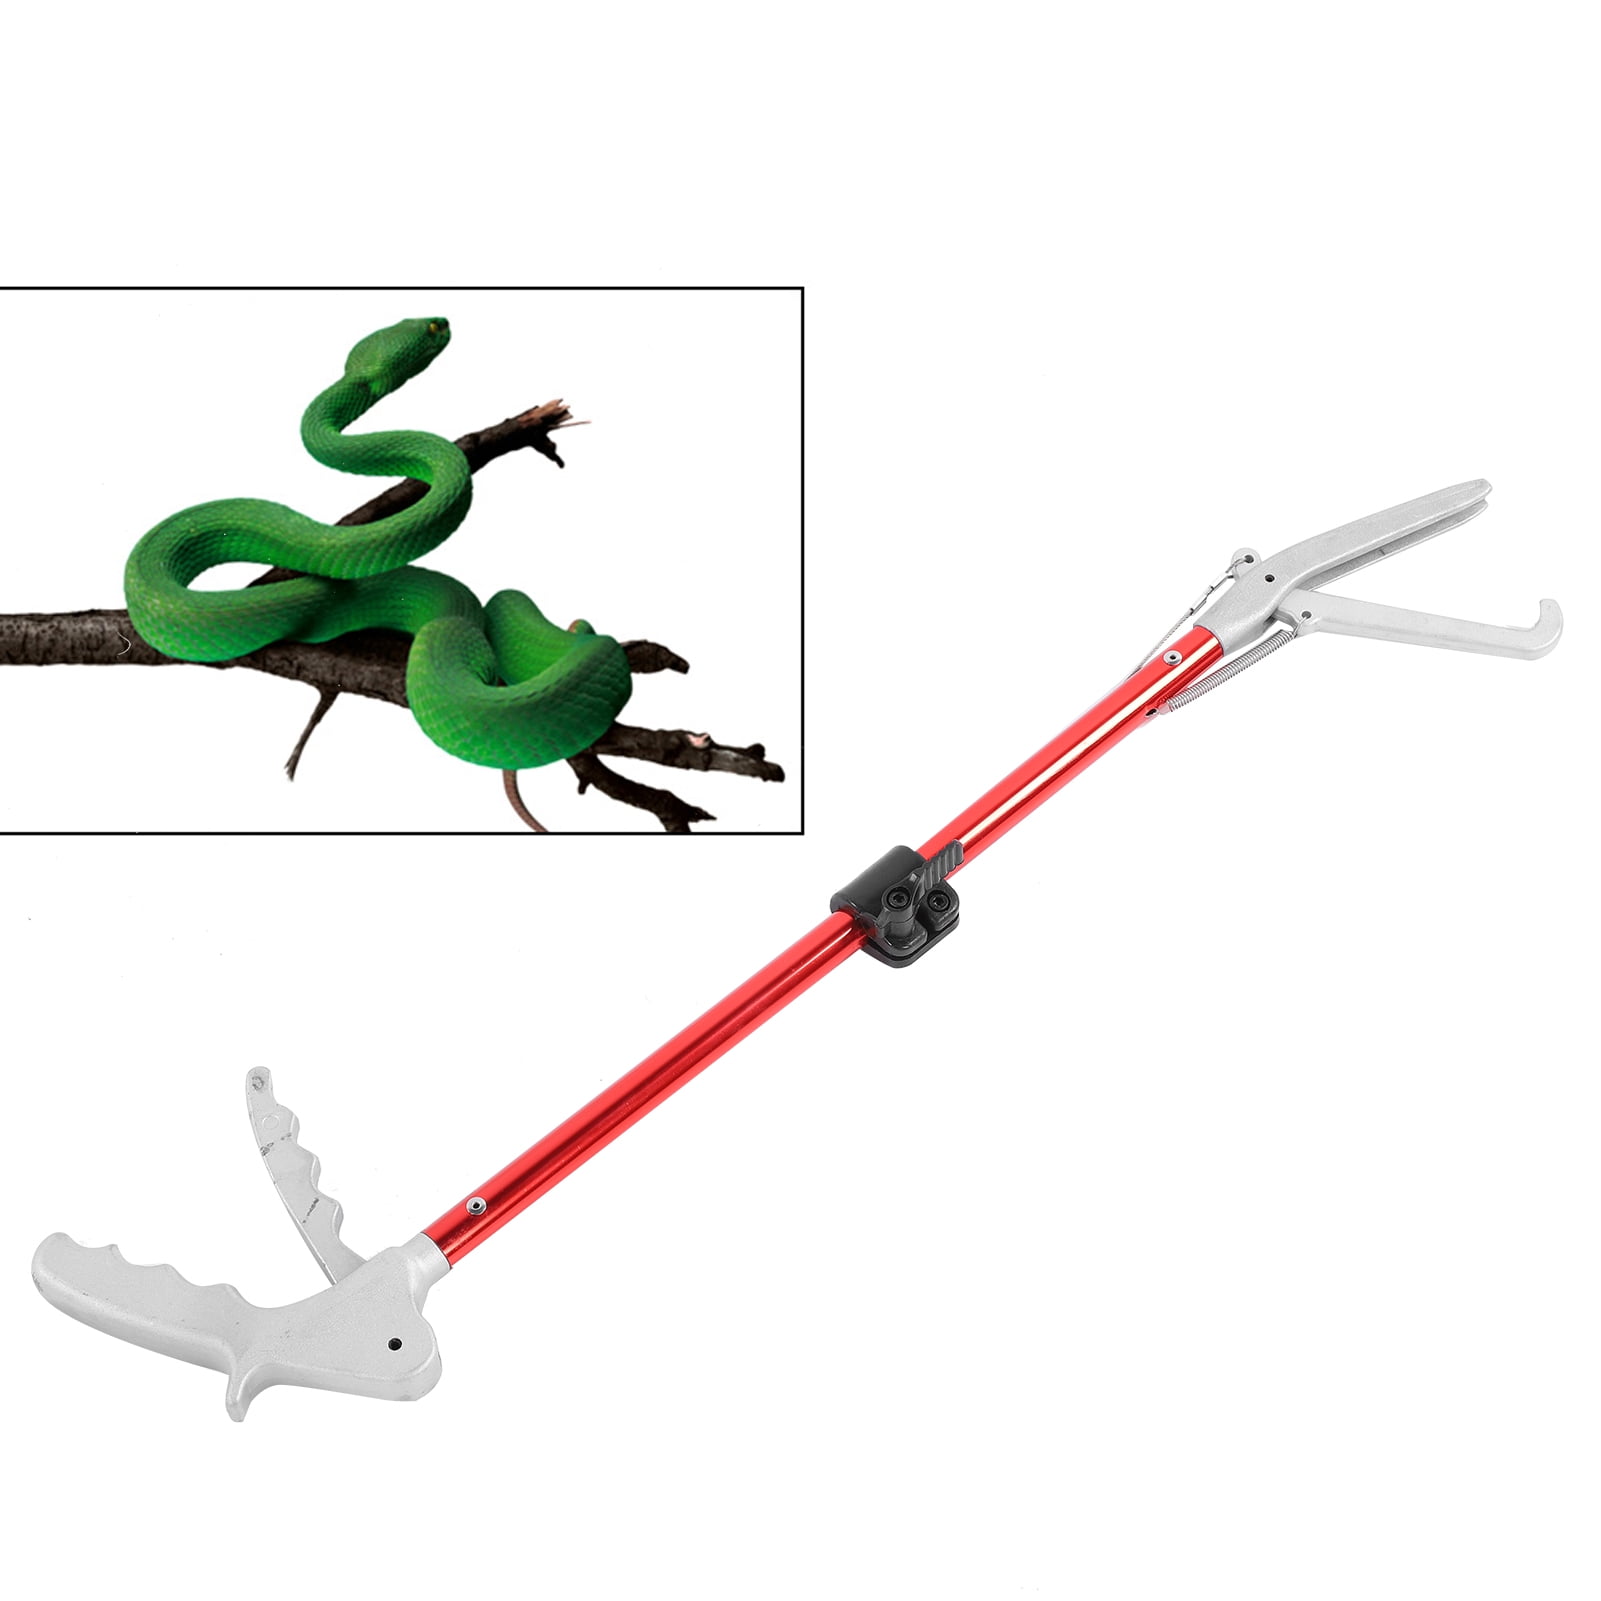 LSSJJ Foldable Snake Catcher 70CM Aluminum Alloy Foldable Professional Snake Grabber Collapsible Catcher Clip Tool Used for Camping Driving Away Pets and Reptiles Grabbing Snakes etc. 